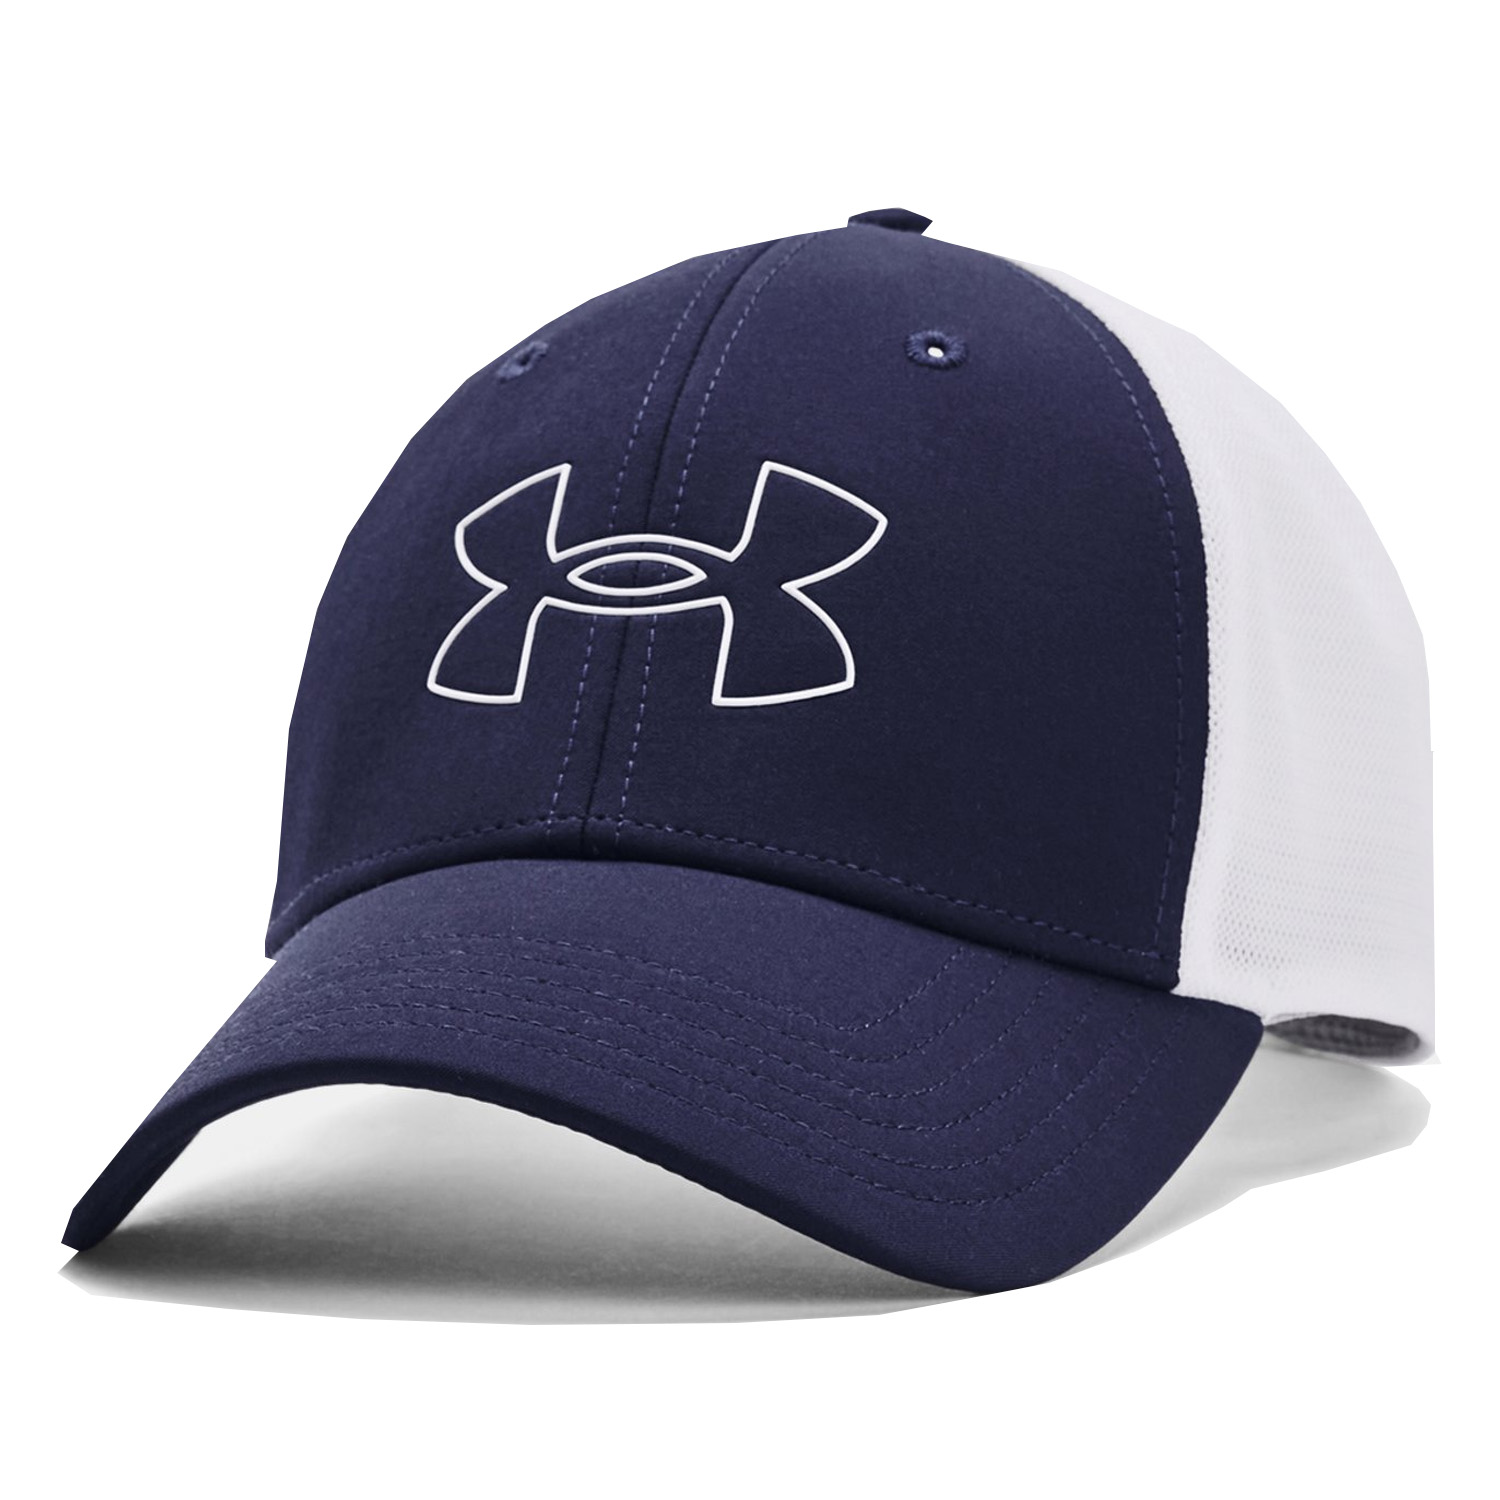 Under Armour Iso-Chill Mesh Adjustable Cap